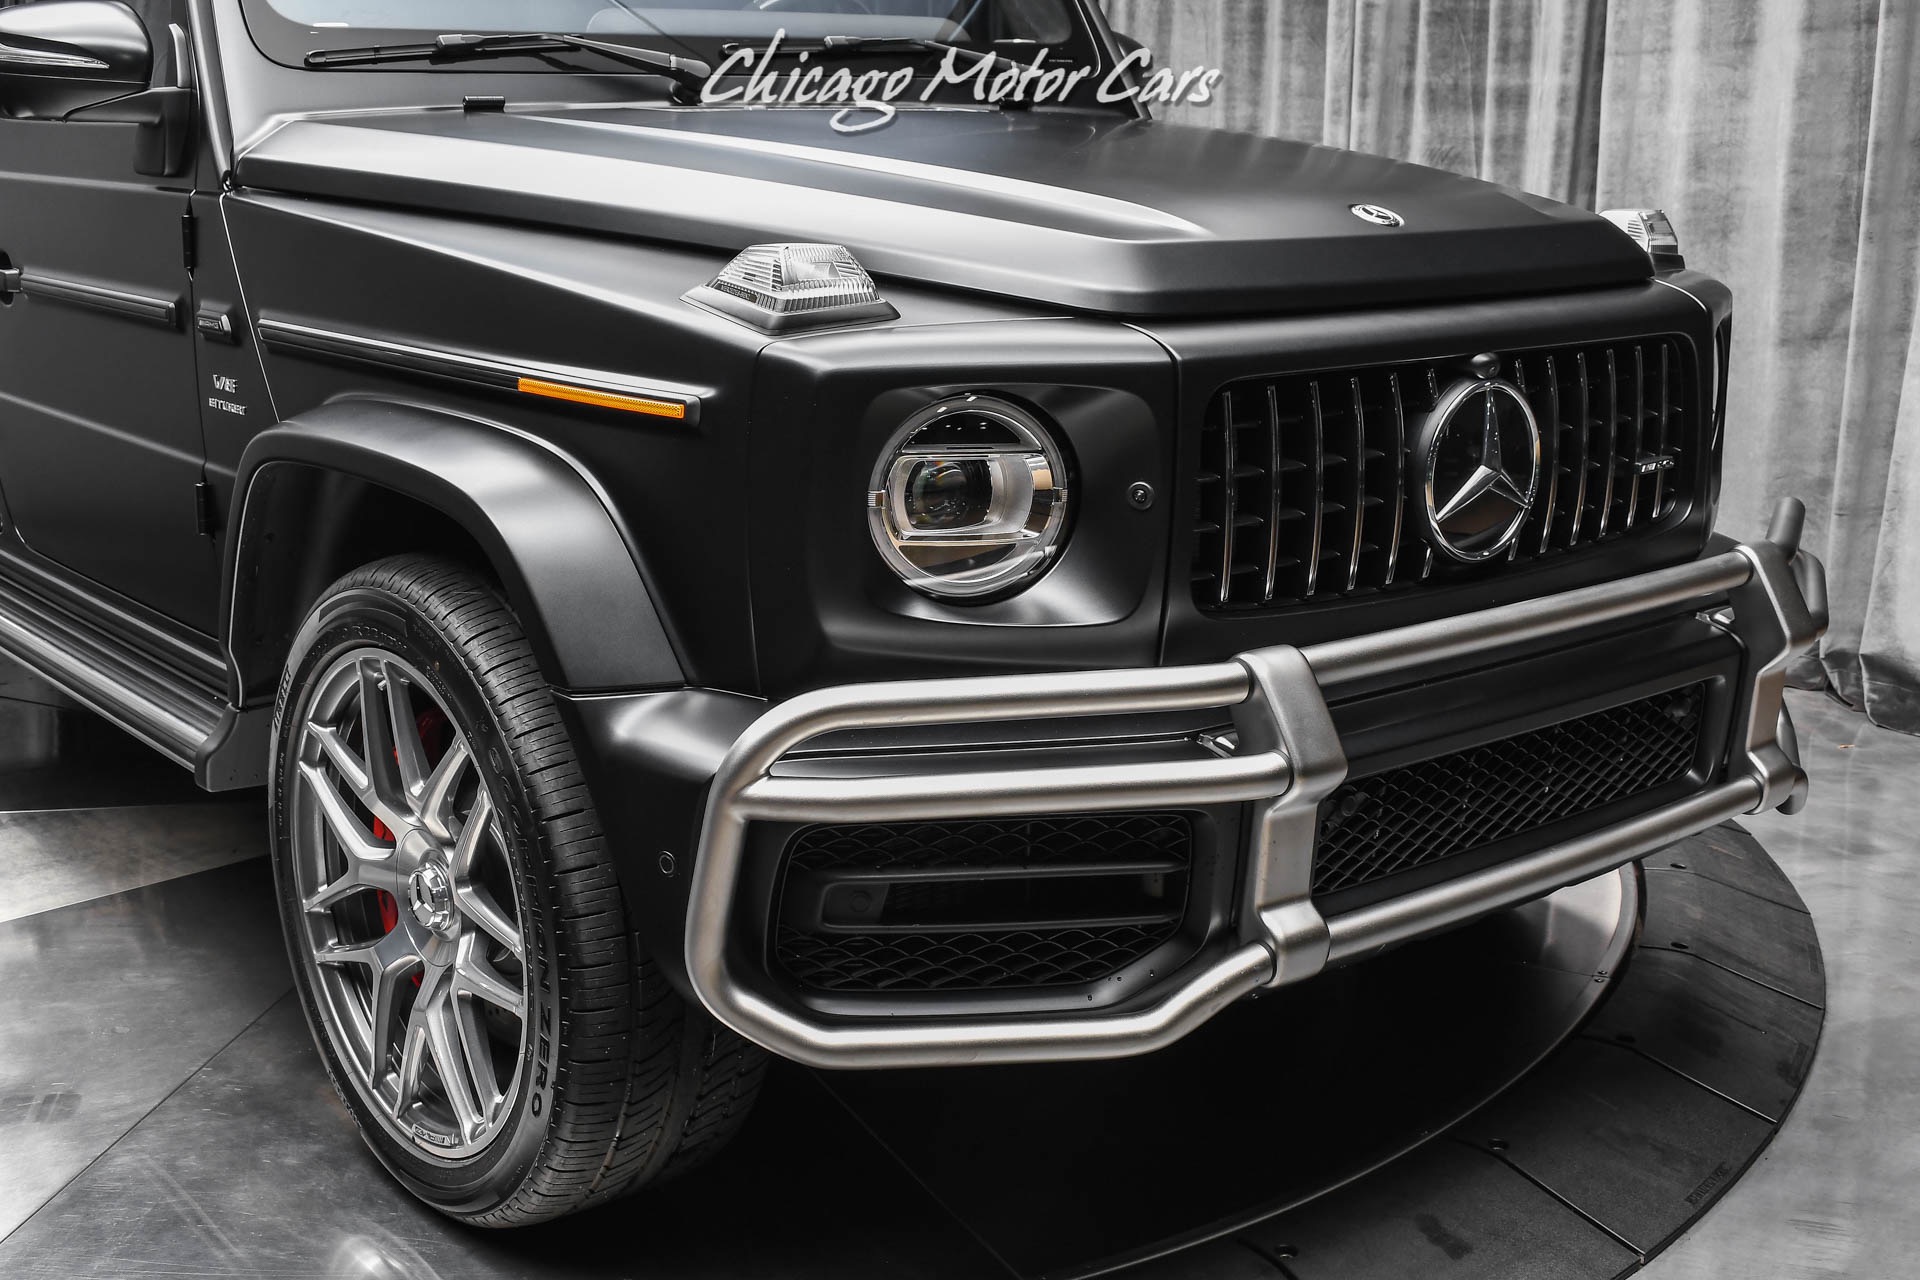 Used 21 Mercedes Benz G63 Amg G63 4matic Exclusive Interior Package Carbon Fiber Magno Black For Sale Special Pricing Chicago Motor Cars Stock